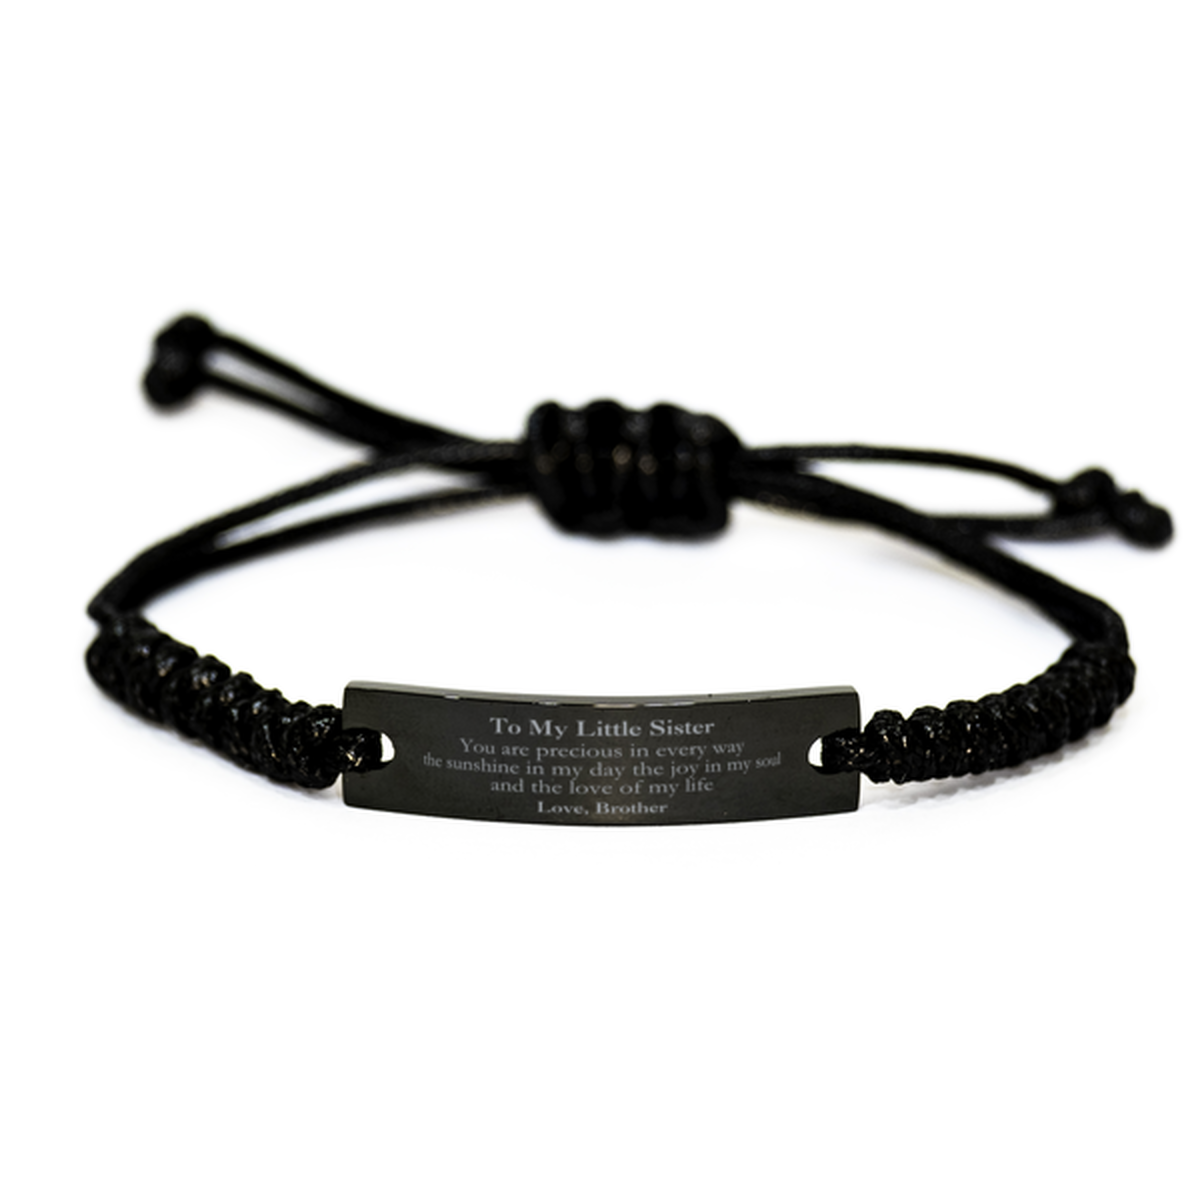 Graduation Gifts for Little Sister Black Rope Bracelet Present from Brother, Christmas Little Sister Birthday Gifts Little Sister You are precious in every way the sunshine in my day. Love, Brother